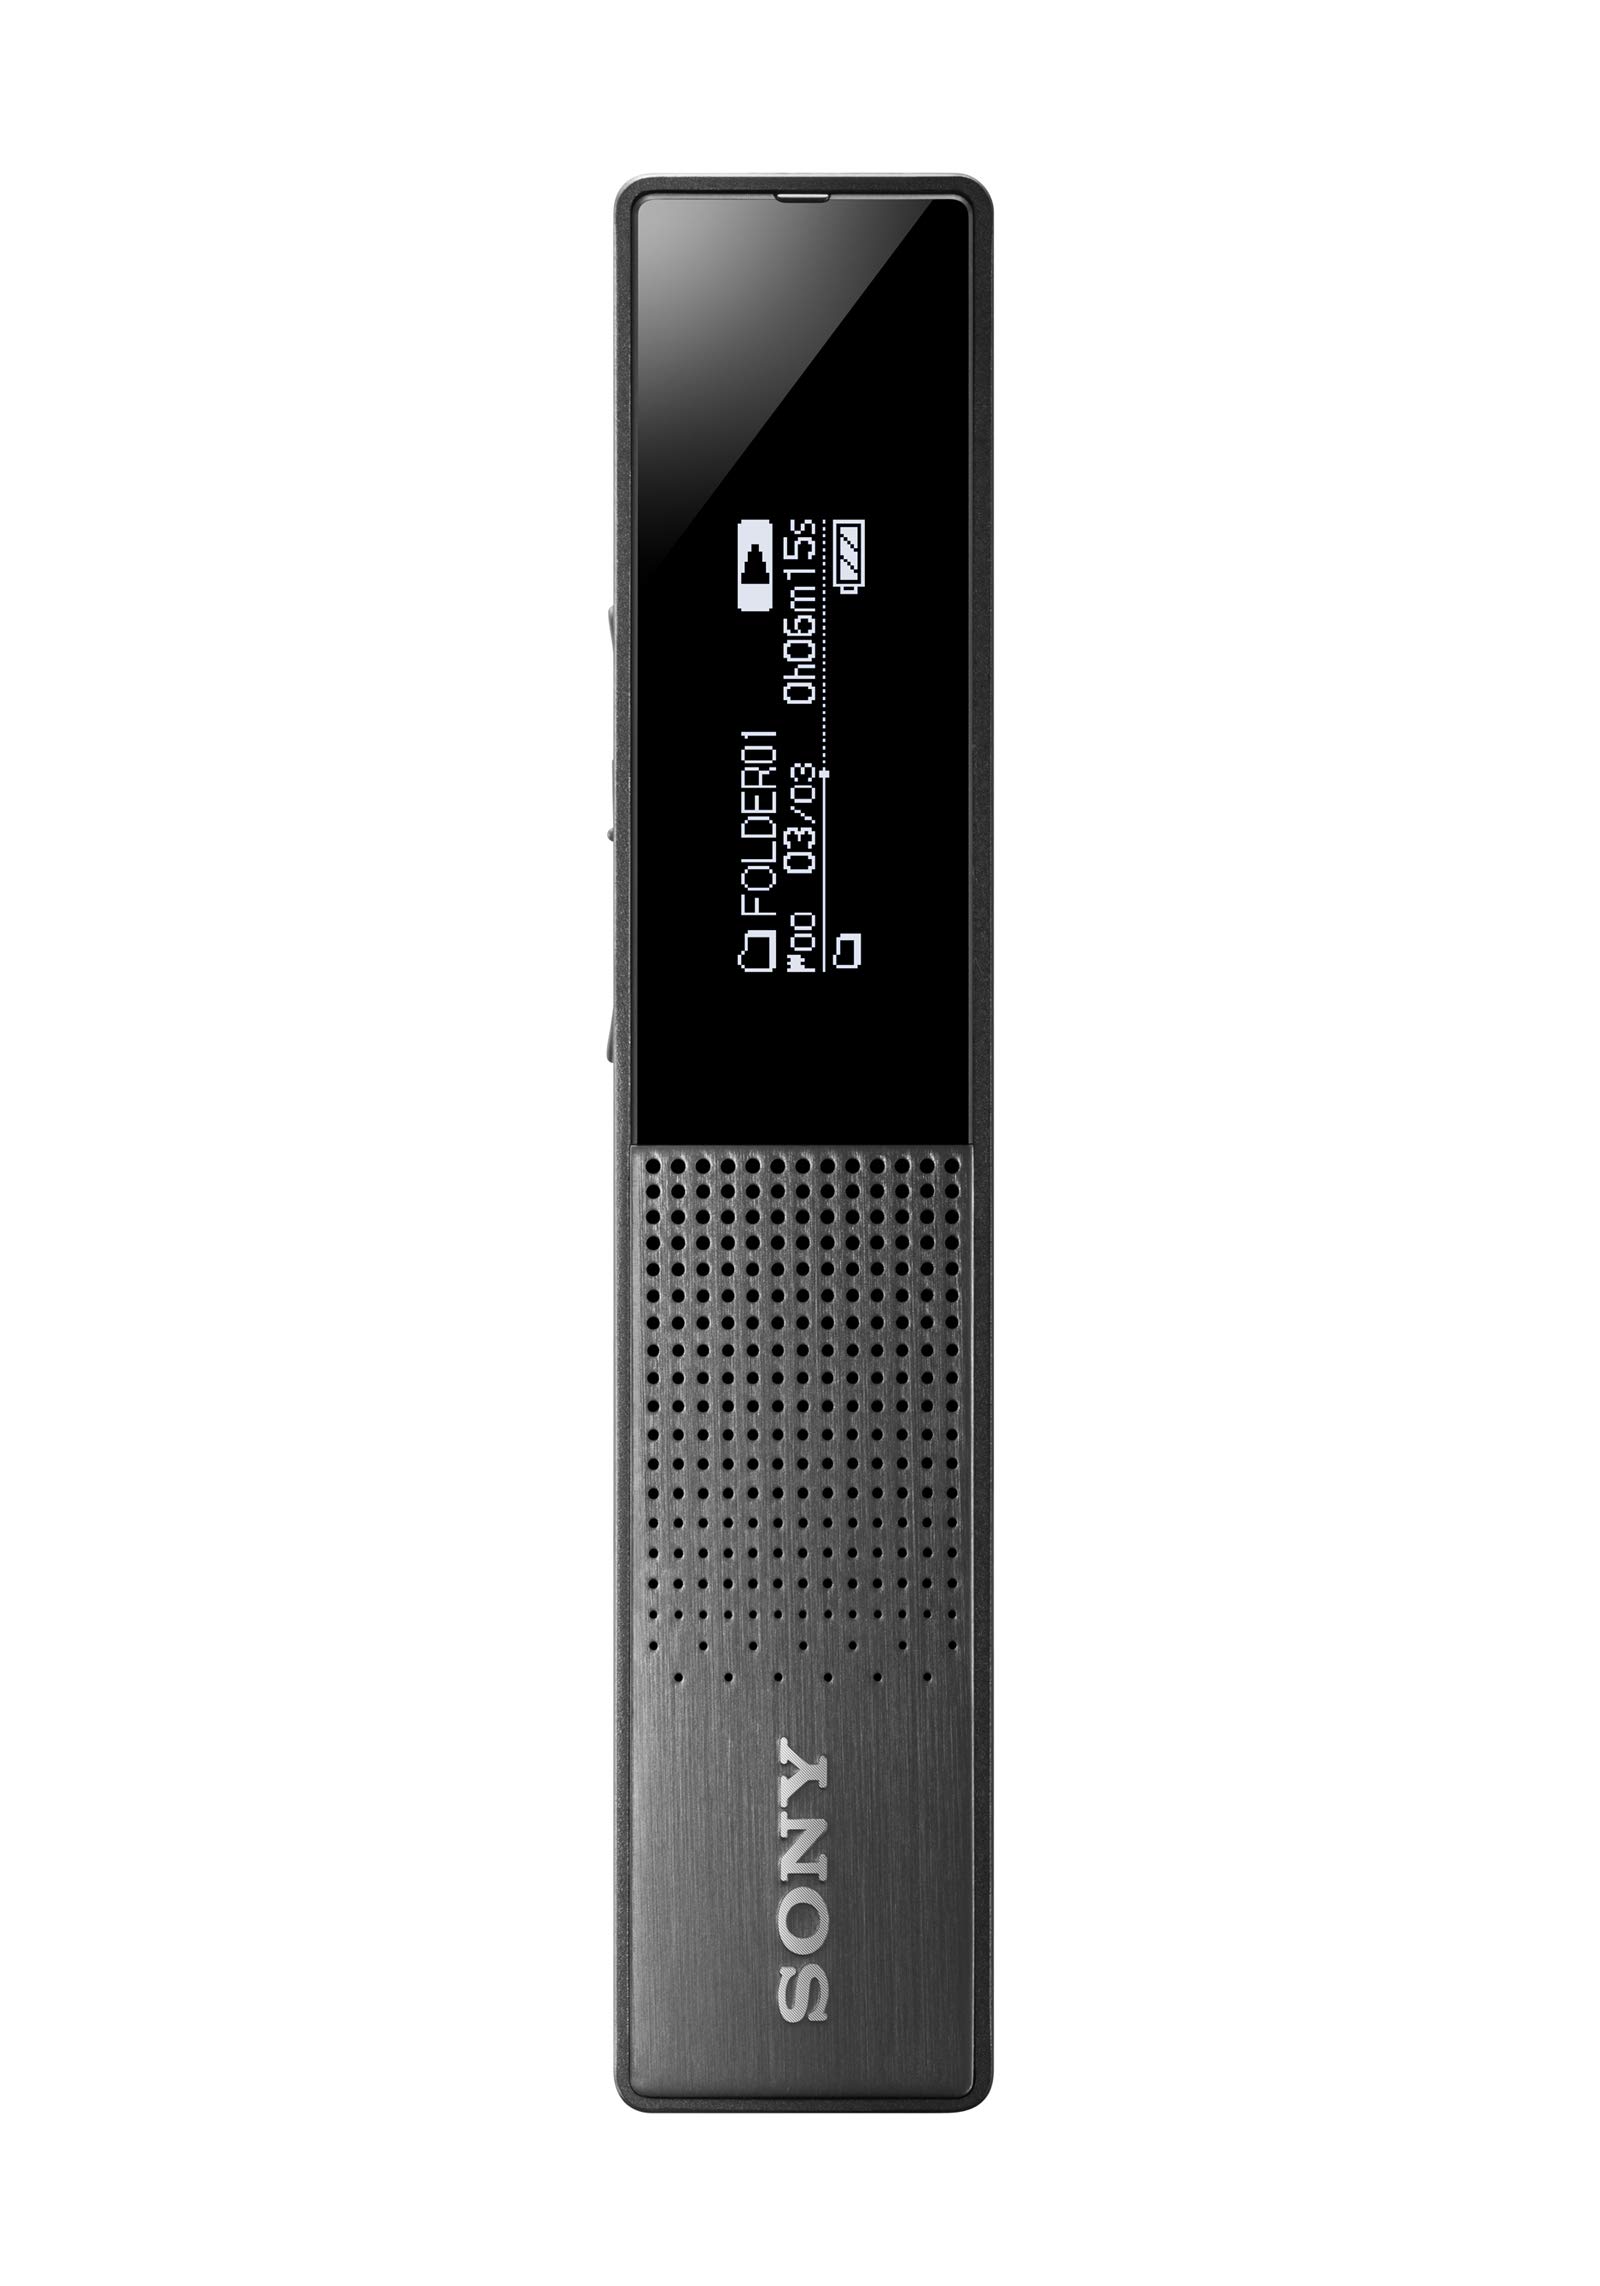 Sony ICD-TX650 Slim Digital PCM/MP3 Stereo Voice Recorder with OLED Bright Display, Black